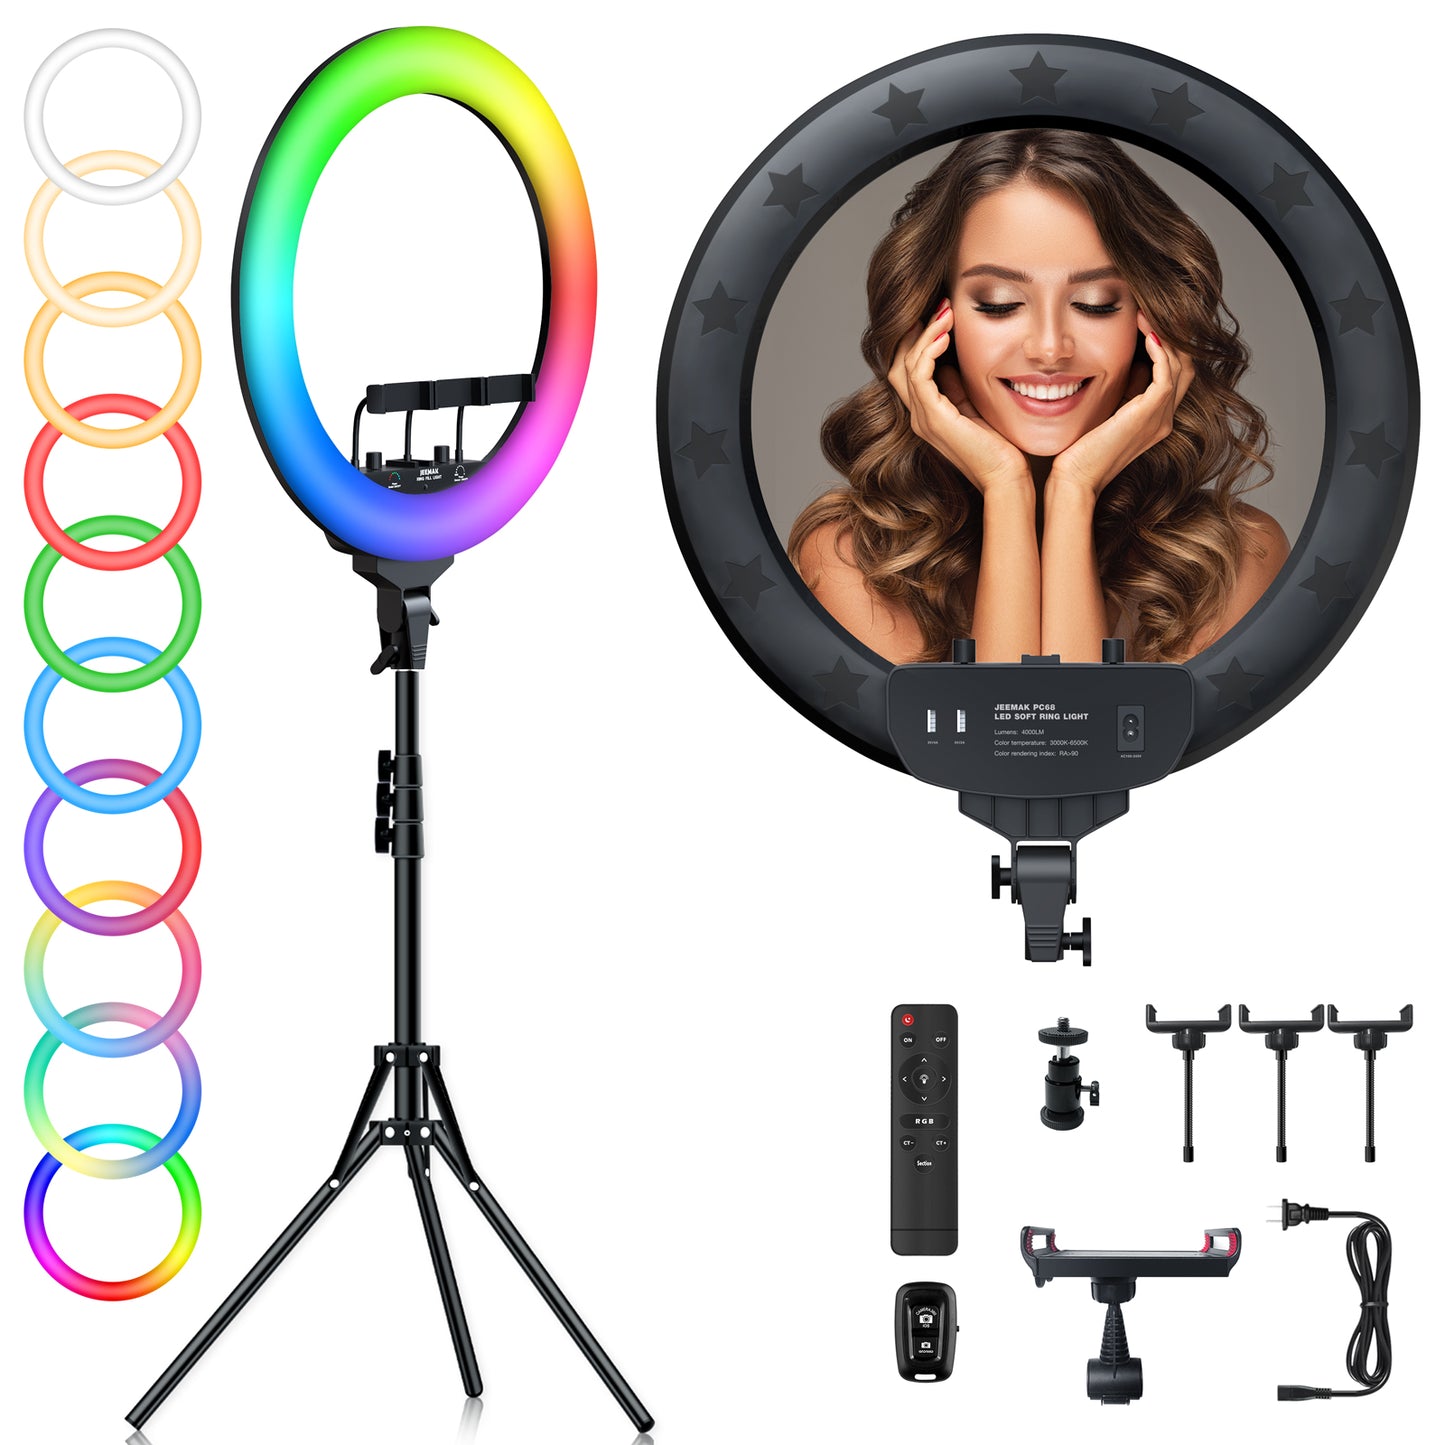 Jeemak 18 inch RGB Ring Light 49 Colors Circle Selfie Ring Light with Stand Phone Holder for Camera Photography Live Stream Makeup TikTok YouTube YouTube